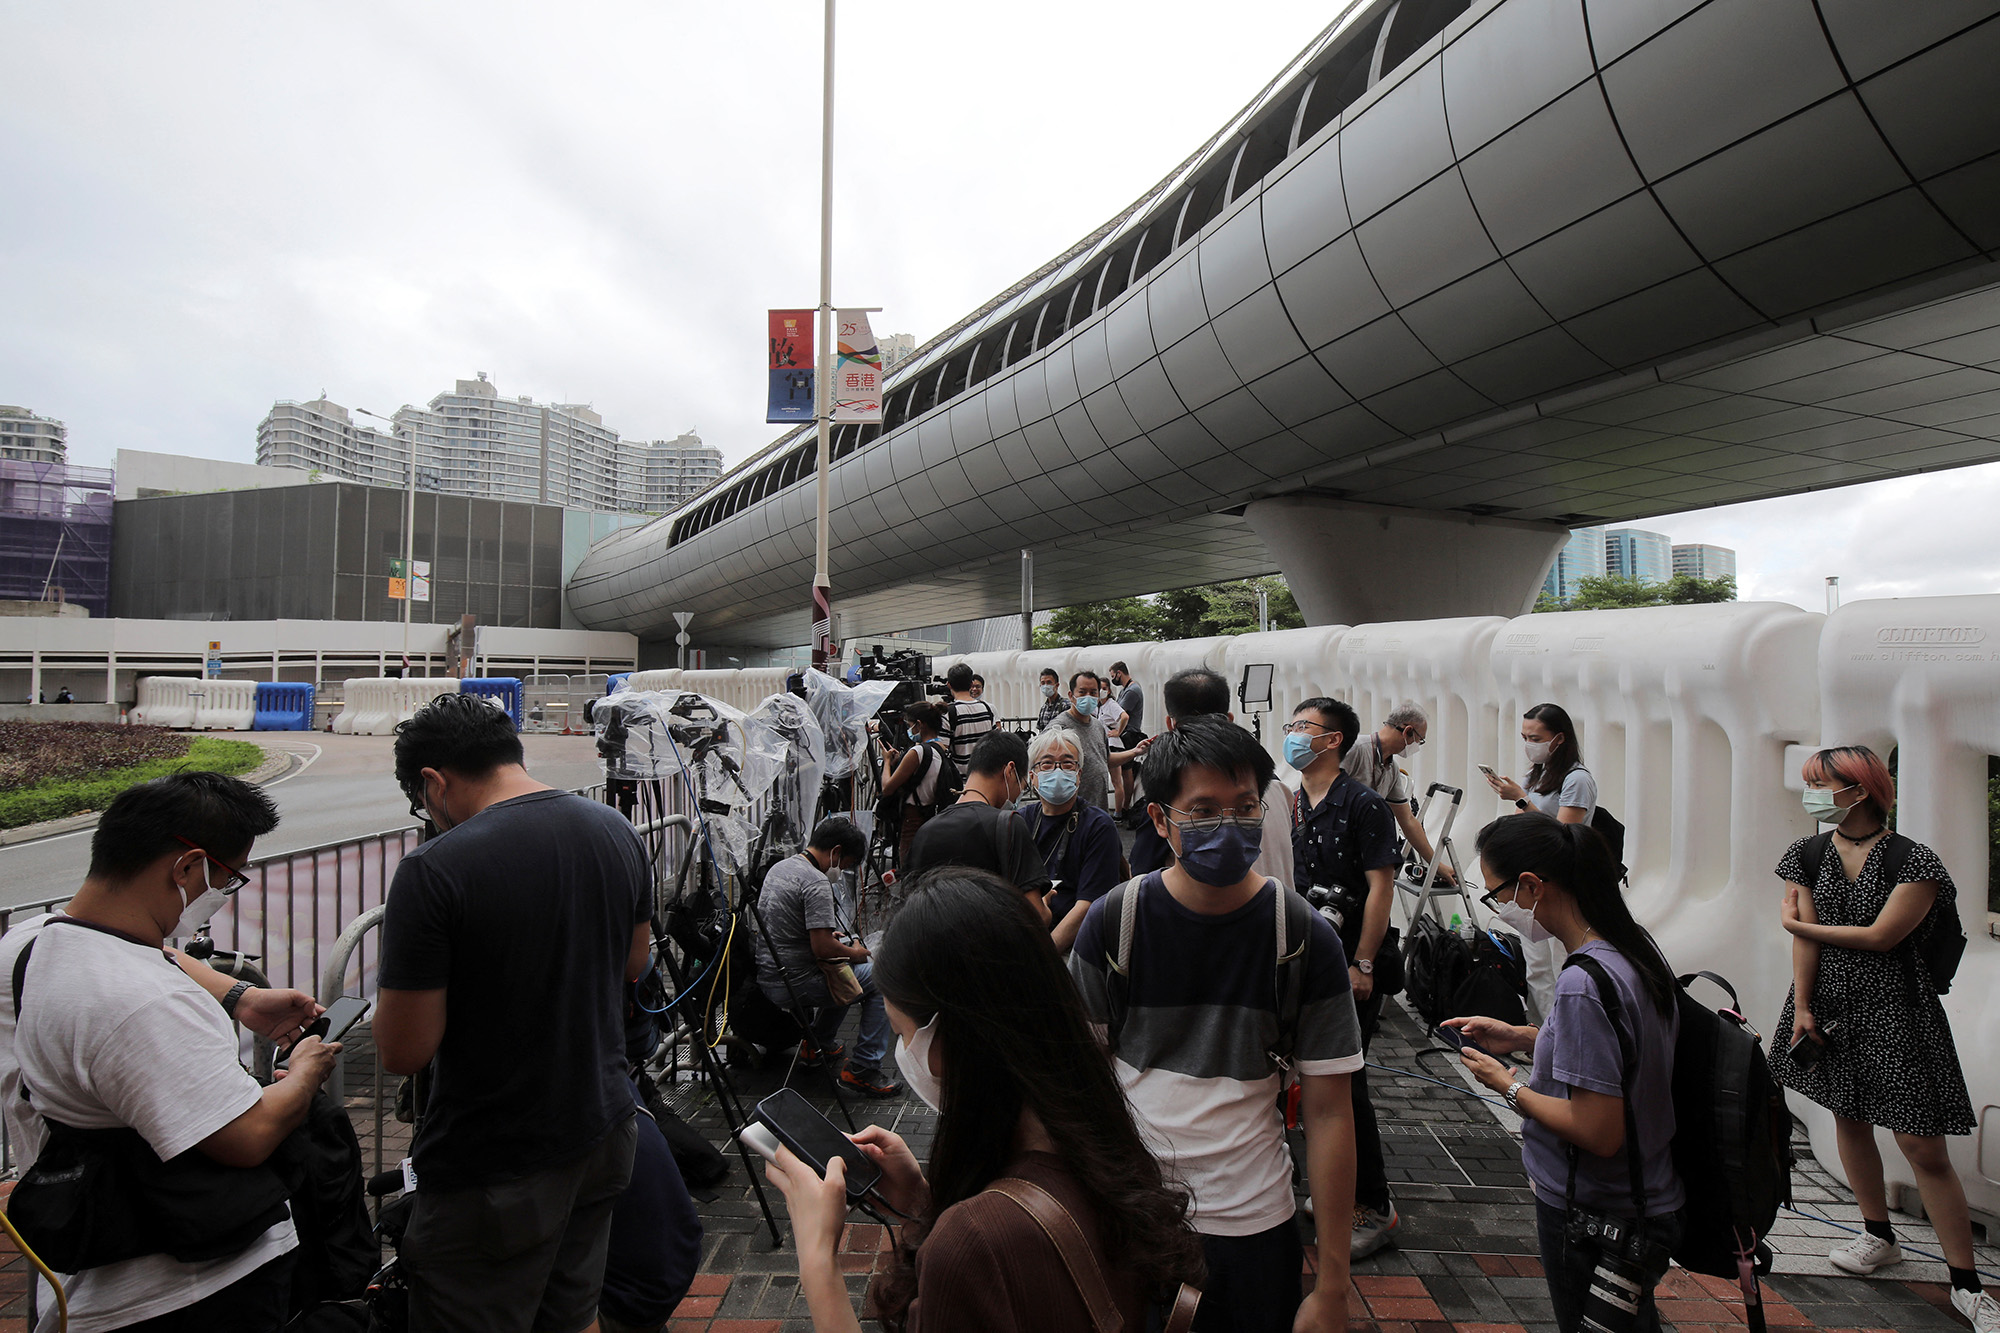 Journalists wait at a media position outside the Hong Kong West Kowloon railway station, before the 25th anniversary of the former British colony's handover to Chinese rule, in Hong Kong on June 30.